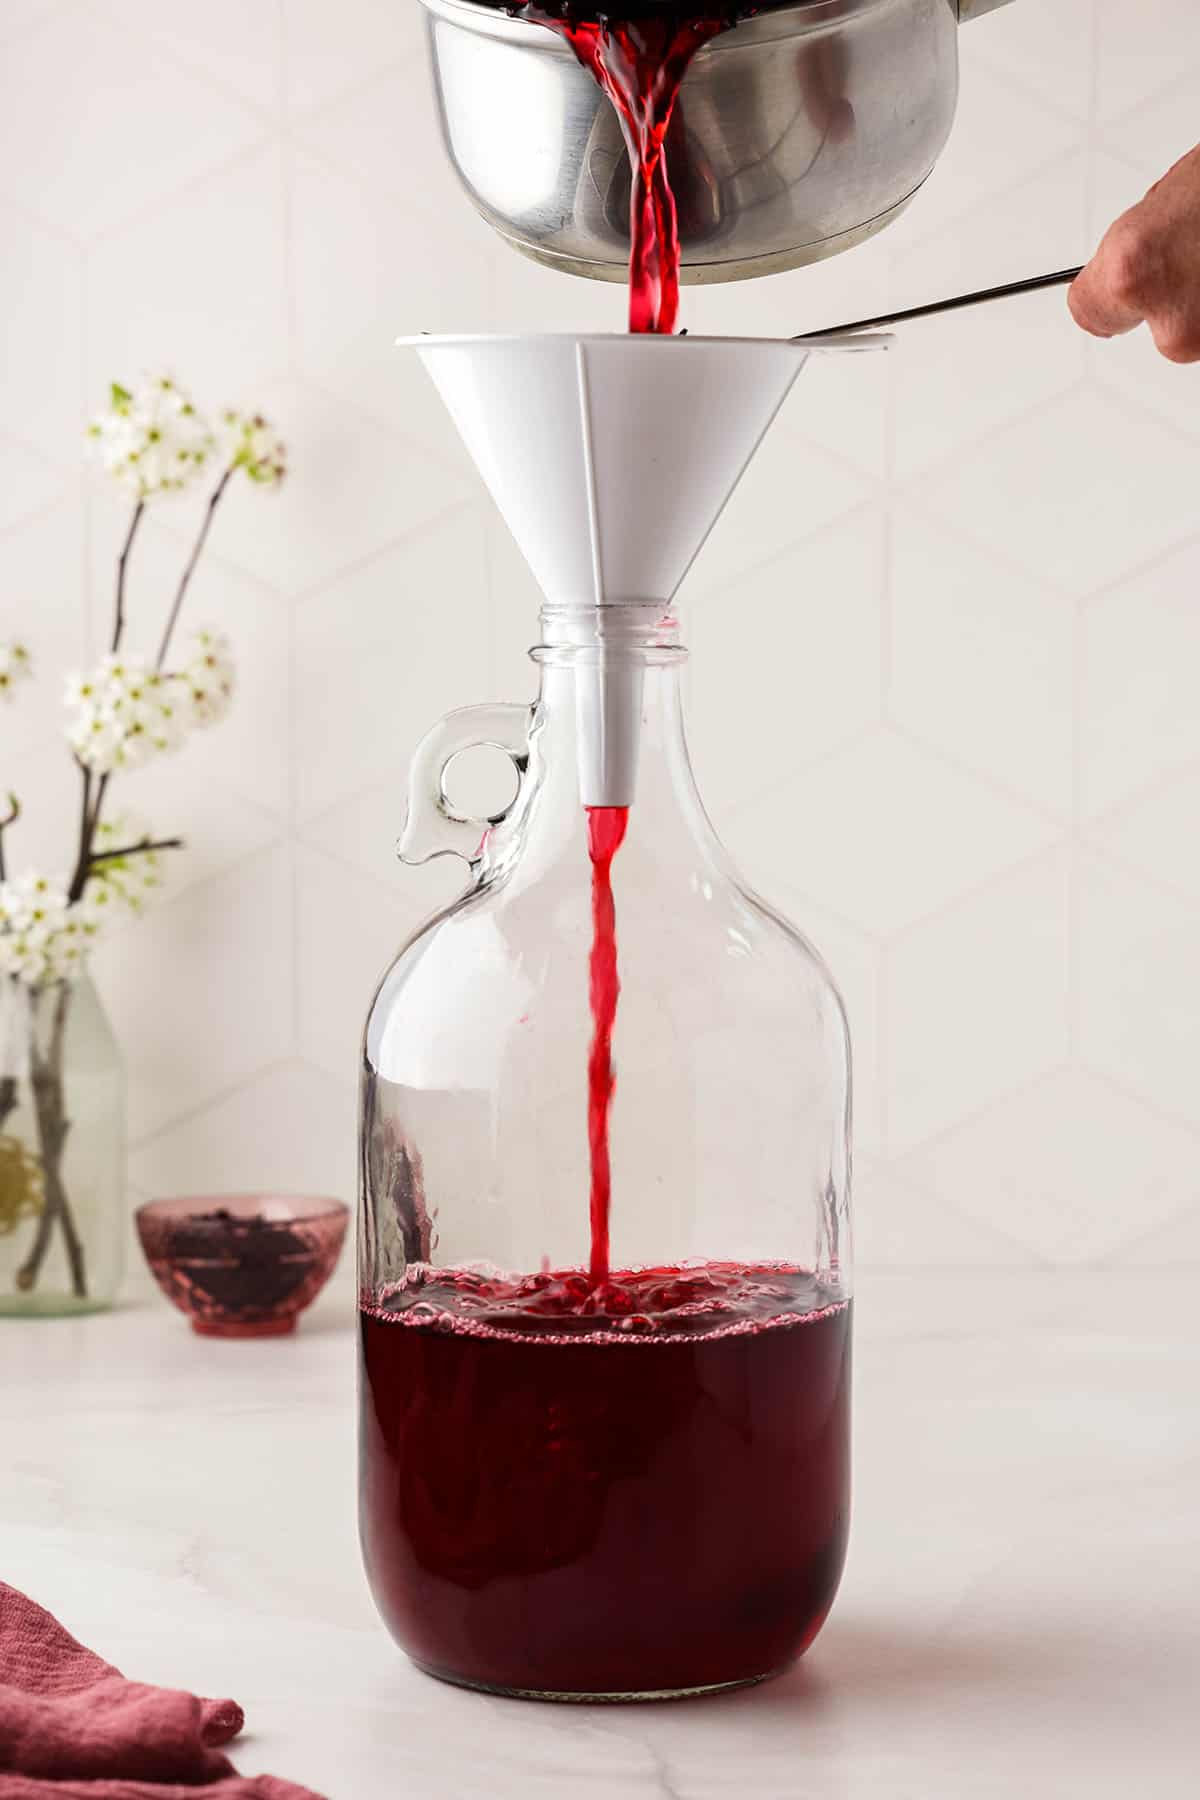 Hibiscus tea straining through a funnel into a bottle, on a white surface. 